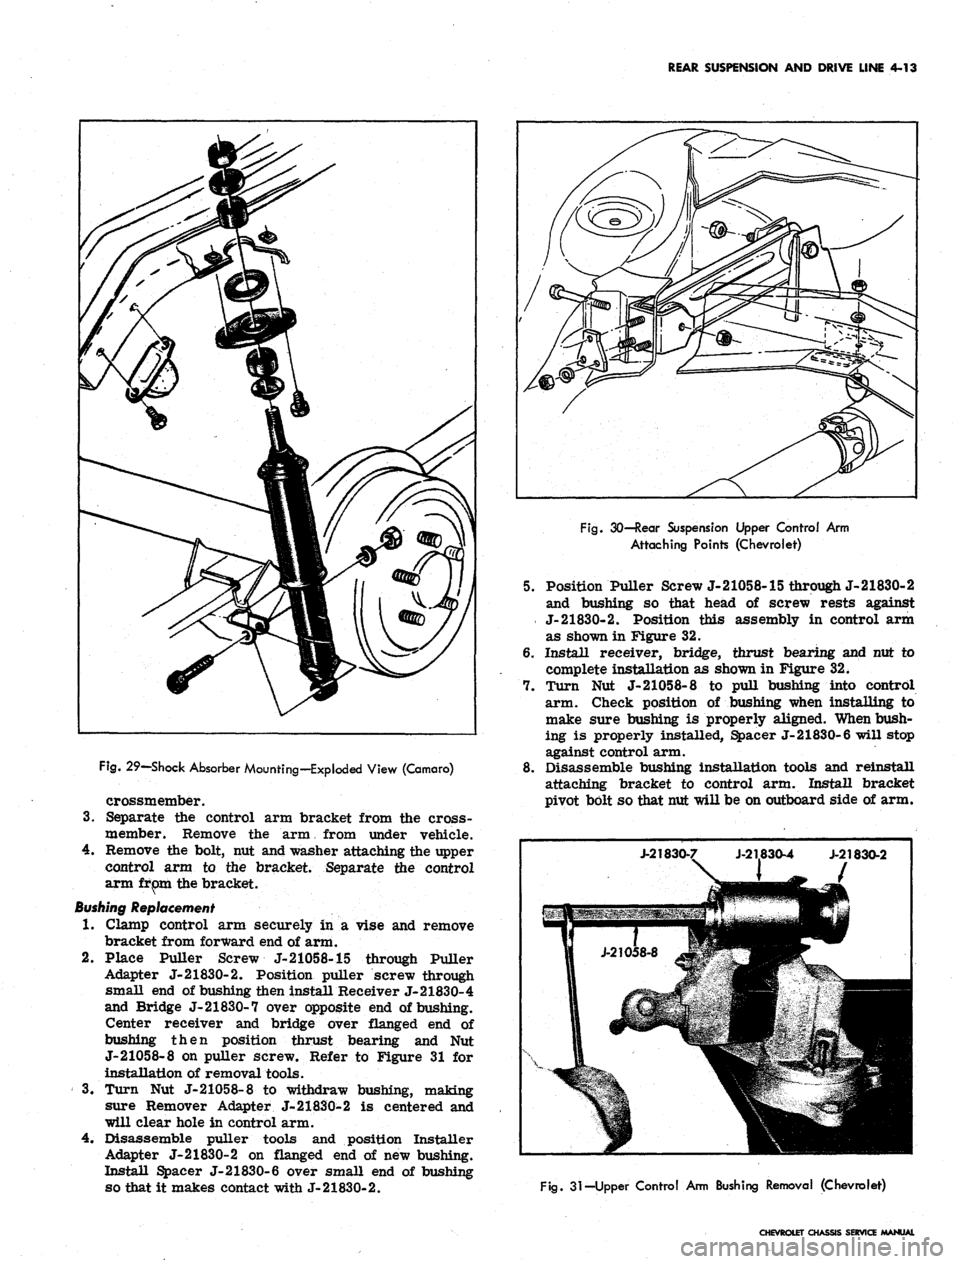 CHEVROLET CAMARO 1967 1.G Chassis Service Manual 
REAR SUSPENSION AND DRIVE LINE 4-13

Fig.
 29—Shock Absorber Mounting—Exploded View (Comoro)

crossmember.

3.
 Separate the control arm bracket from the cross-

member. Remove the arm from under